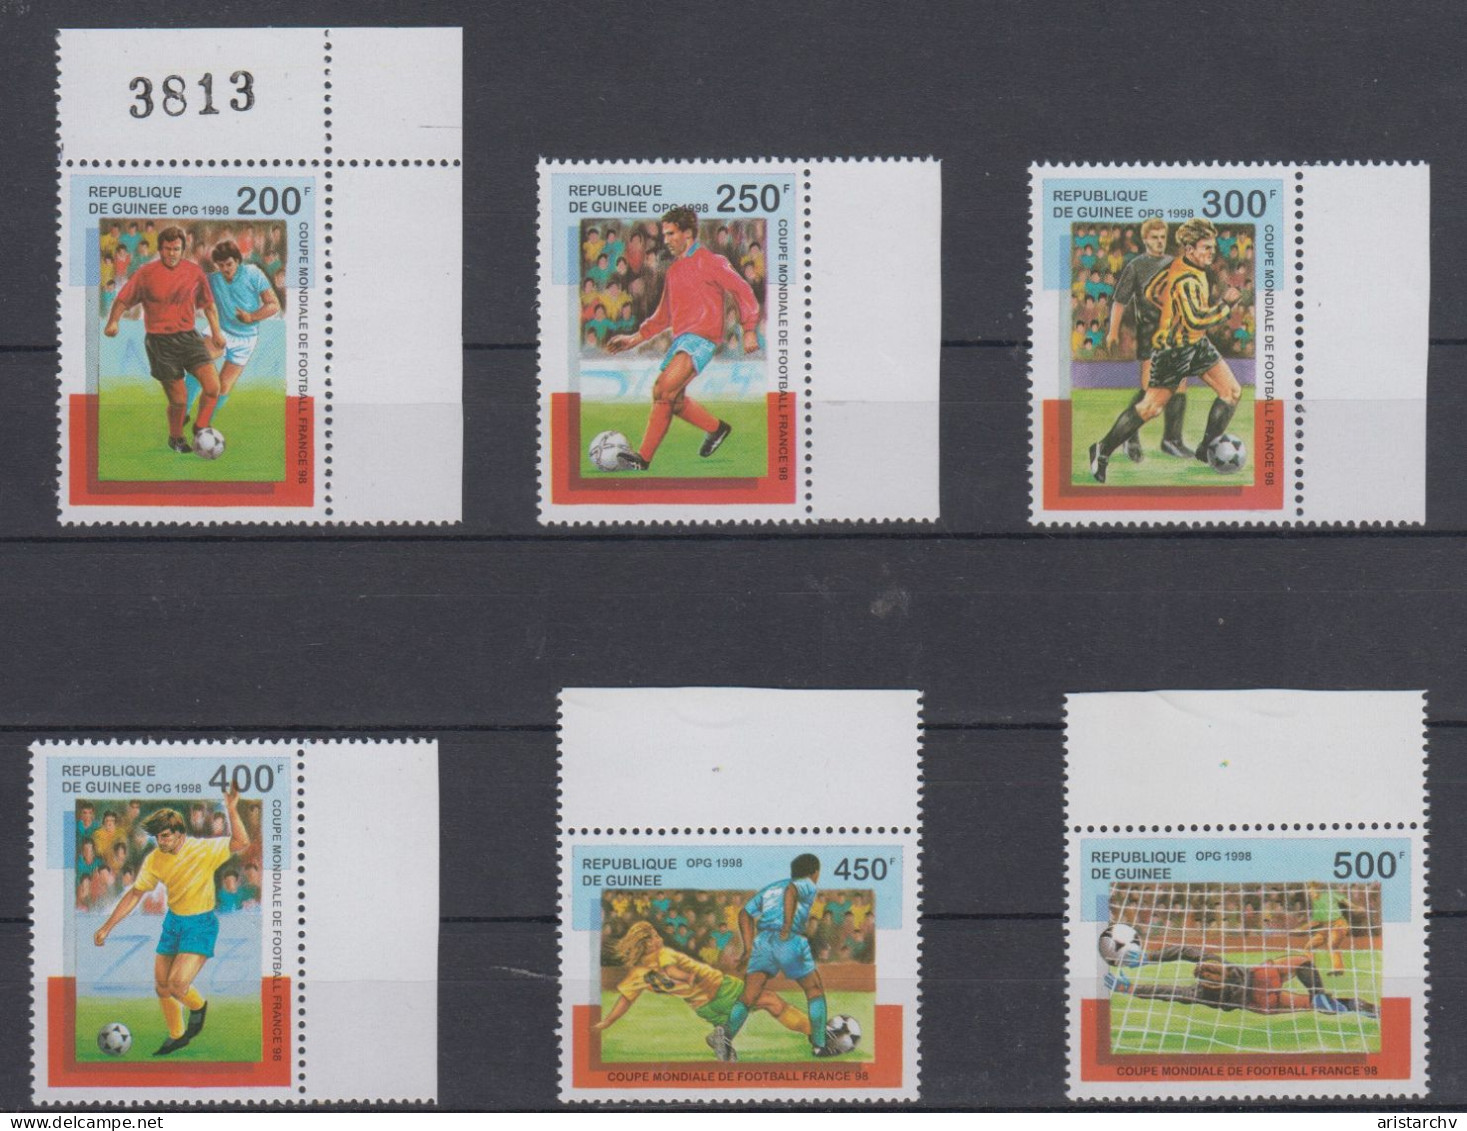 GUINEE 1998 FOOTBALL WORLD CUP S/SHEET AND 6 STAMPS - 1998 – France